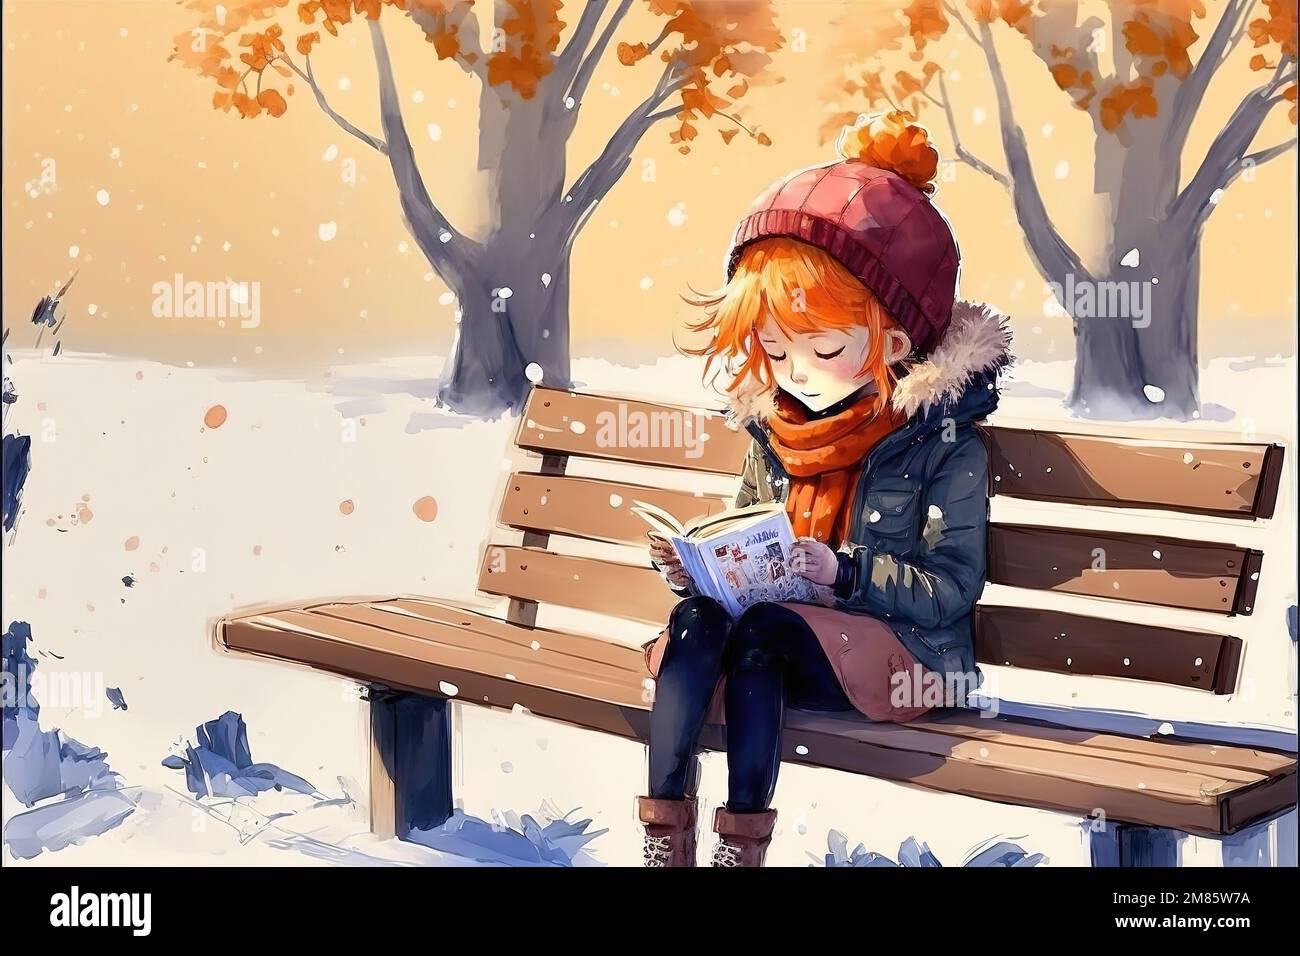 a cute young anime manga girl reading a book on a bench in winter, warm hat  Stock Photo - Alamy